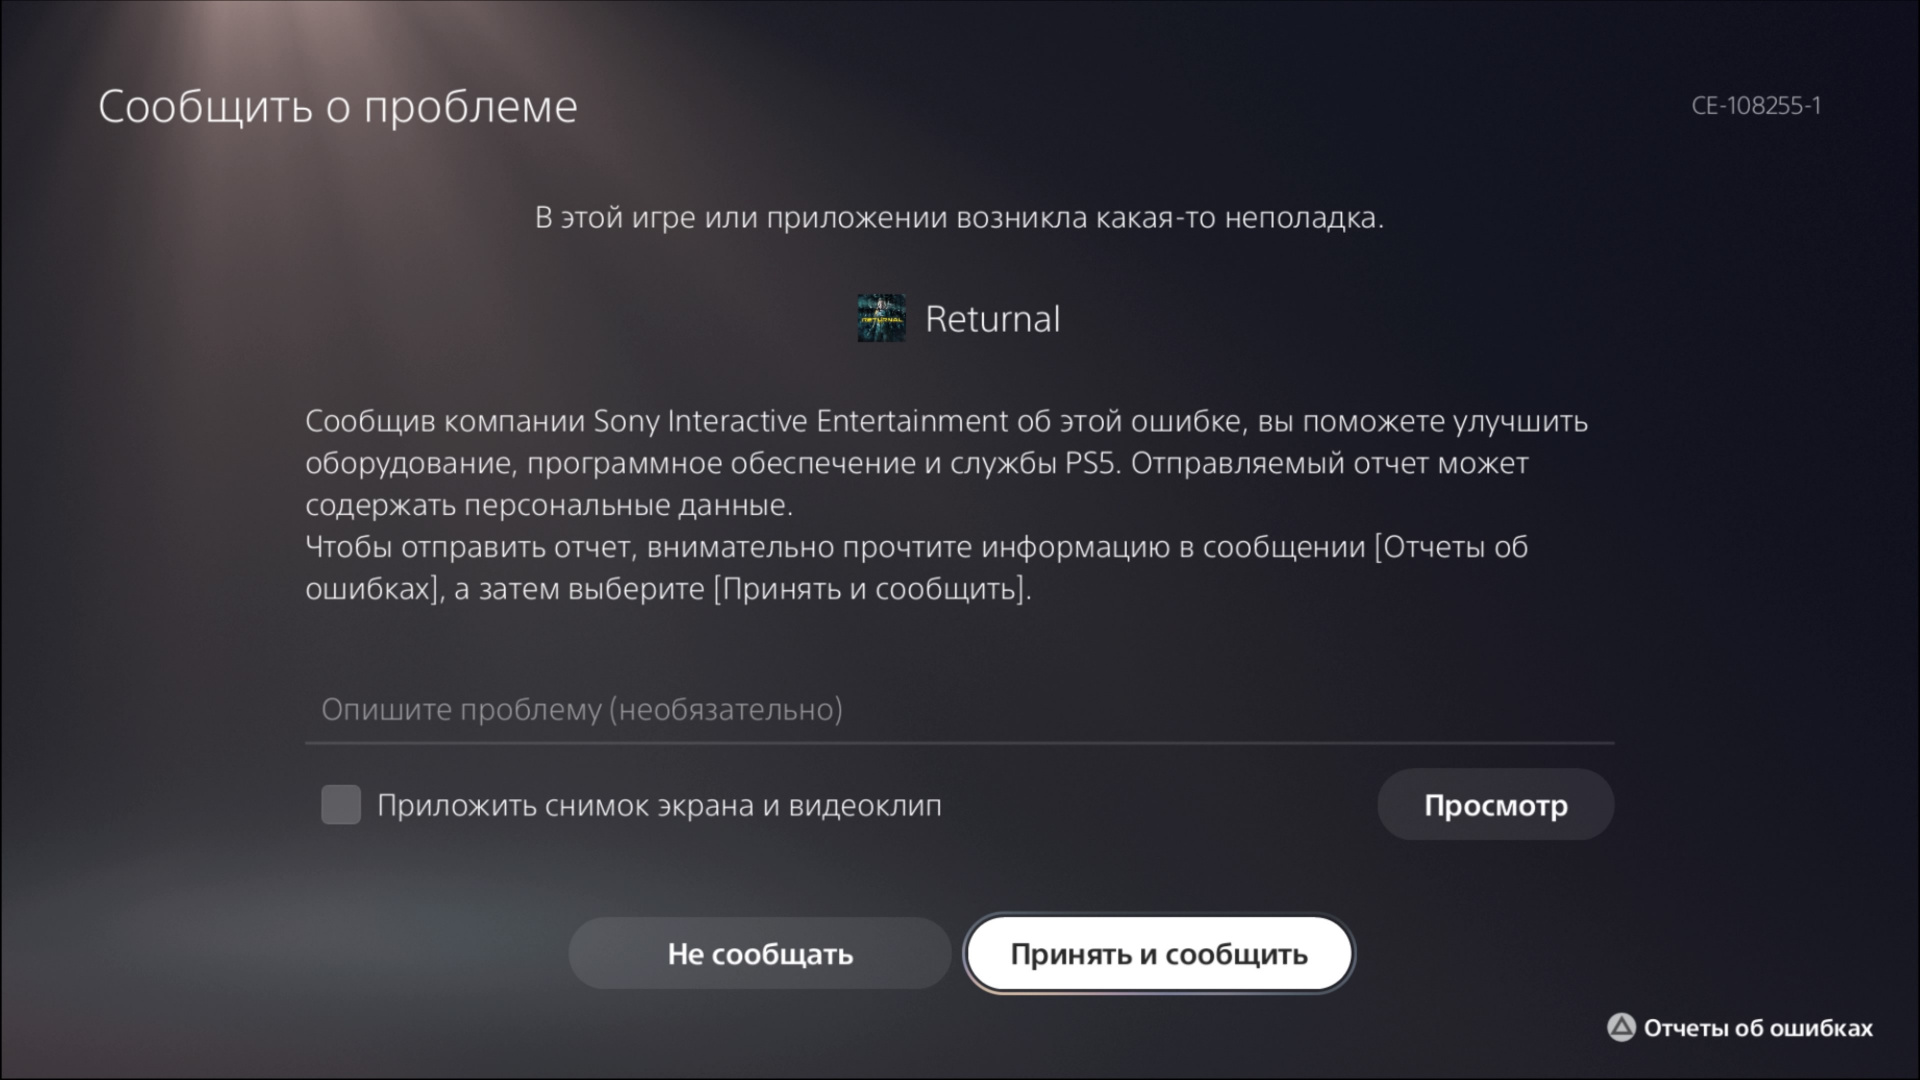 Ps5 ce 108255. Ce-108255-1 ps5 ошибка. PLAYSTATION 5 ошибка ce-108255-1. Ce-108255-1 ps5. Ps5 ce-108255-1 ошибка что означает.